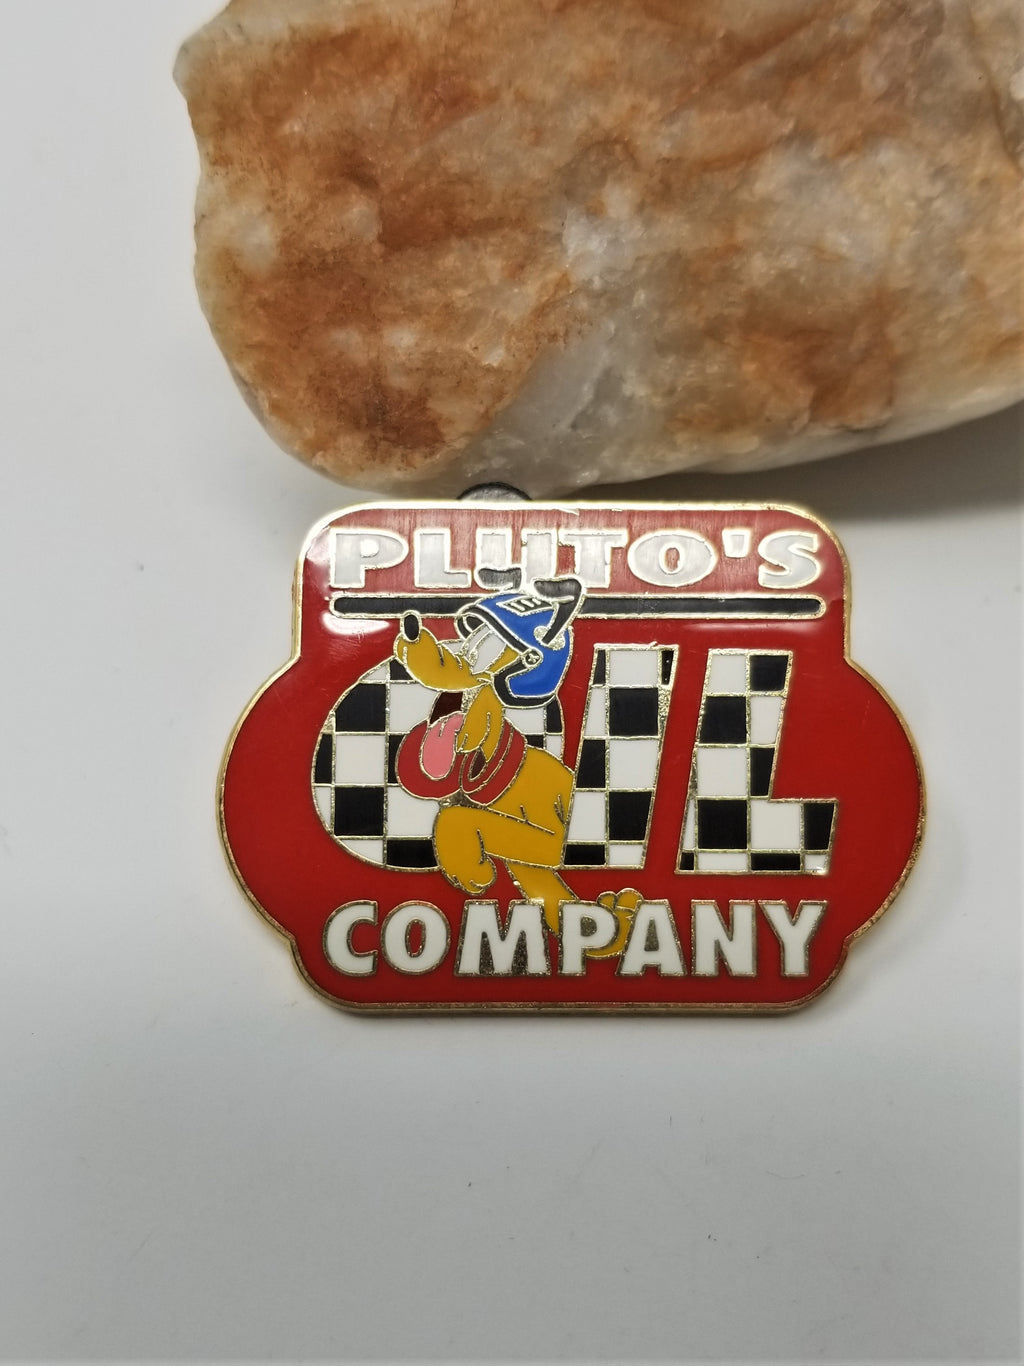 WDW - Race Time - Pluto's Oil Company Disney Pin (Surprise Release)